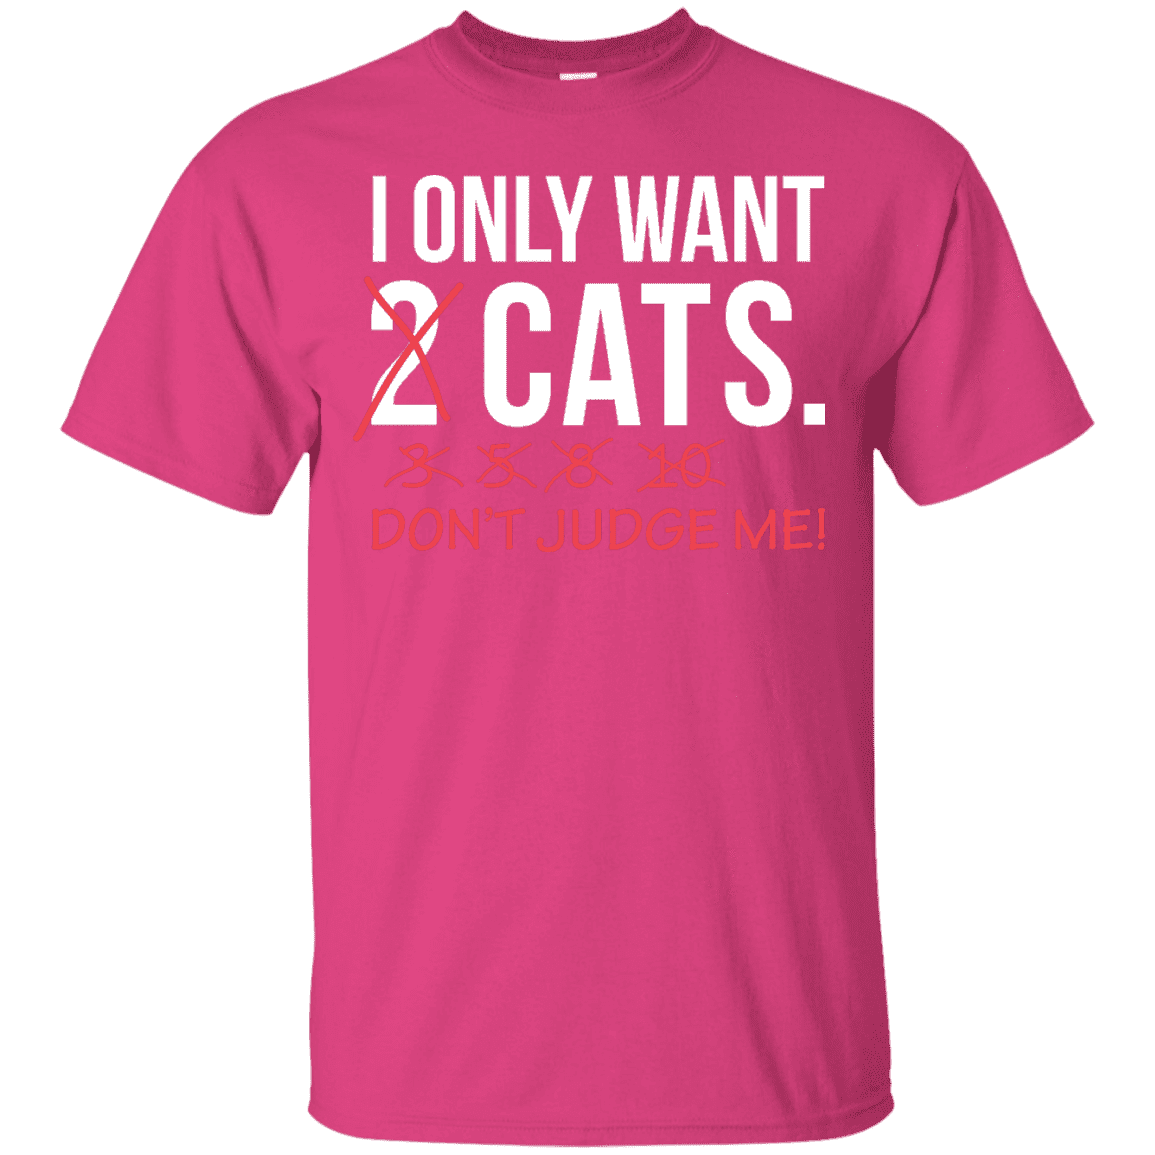 Only Want Cats - T Shirt.